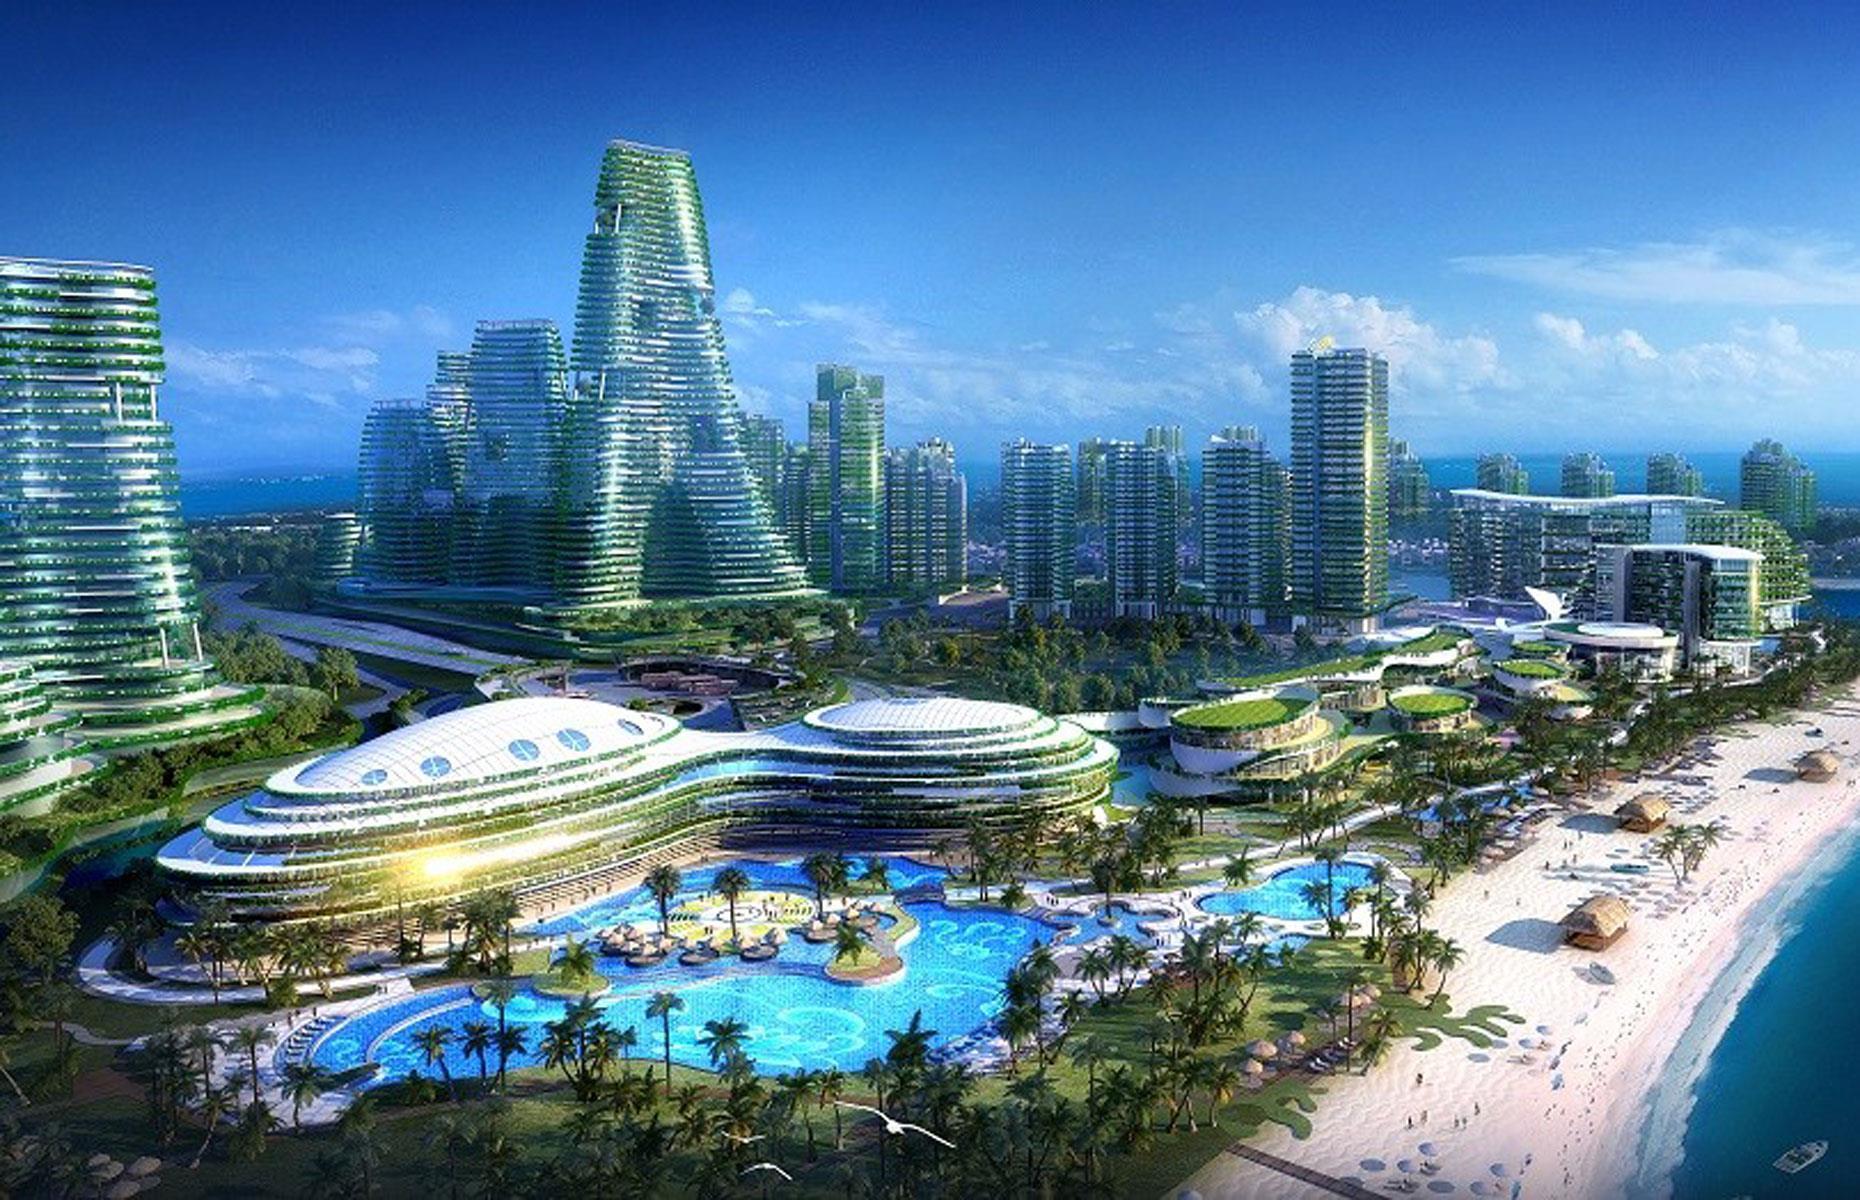 Top 5 most expensive mega construction projects in the world